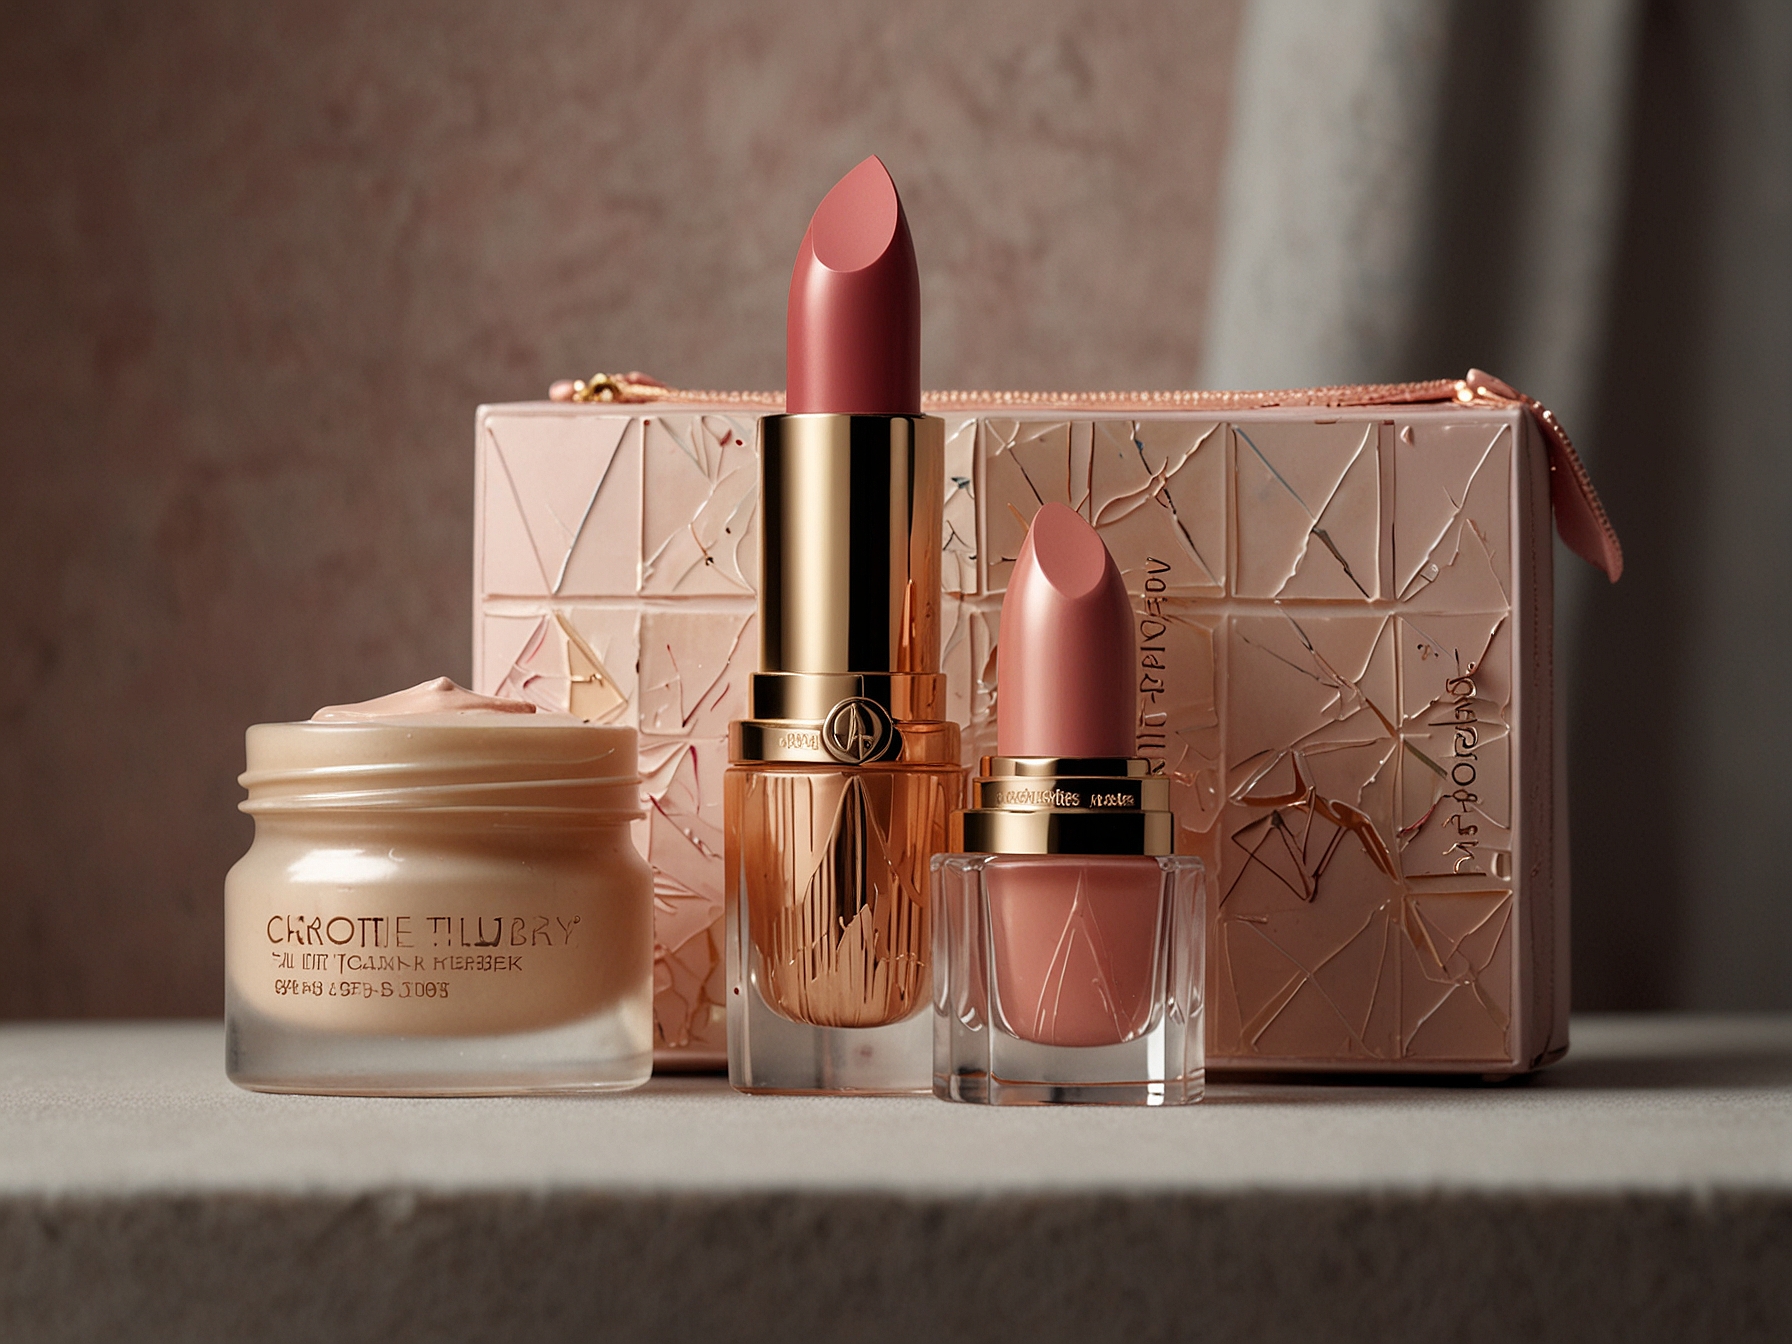 A curated selection of luxury beauty products from Charlotte Tilbury including Magic Cream and Pillow Talk Lipstick, showcased against an elegant backdrop.